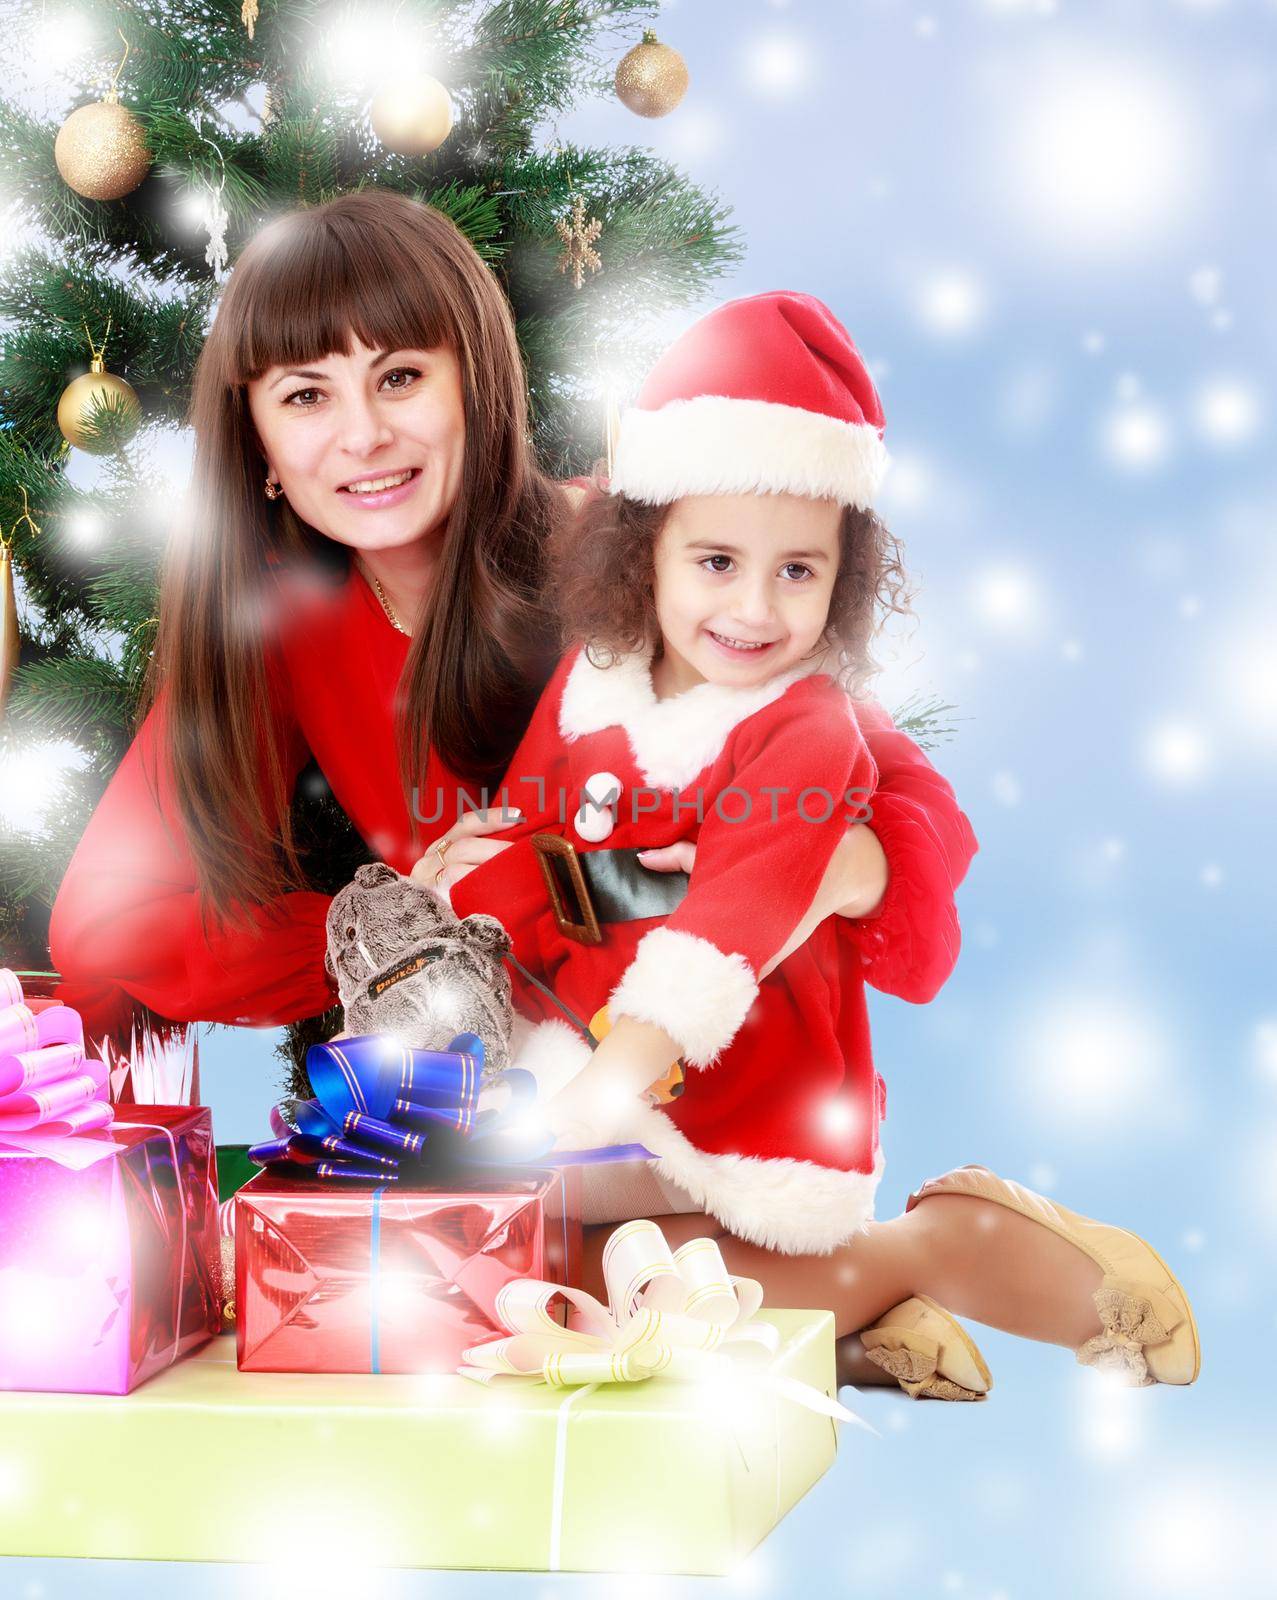 Happy mother and daughter near a Christmas tree surrounded by heaps of gifts.Blue winter background with white snowflakes.